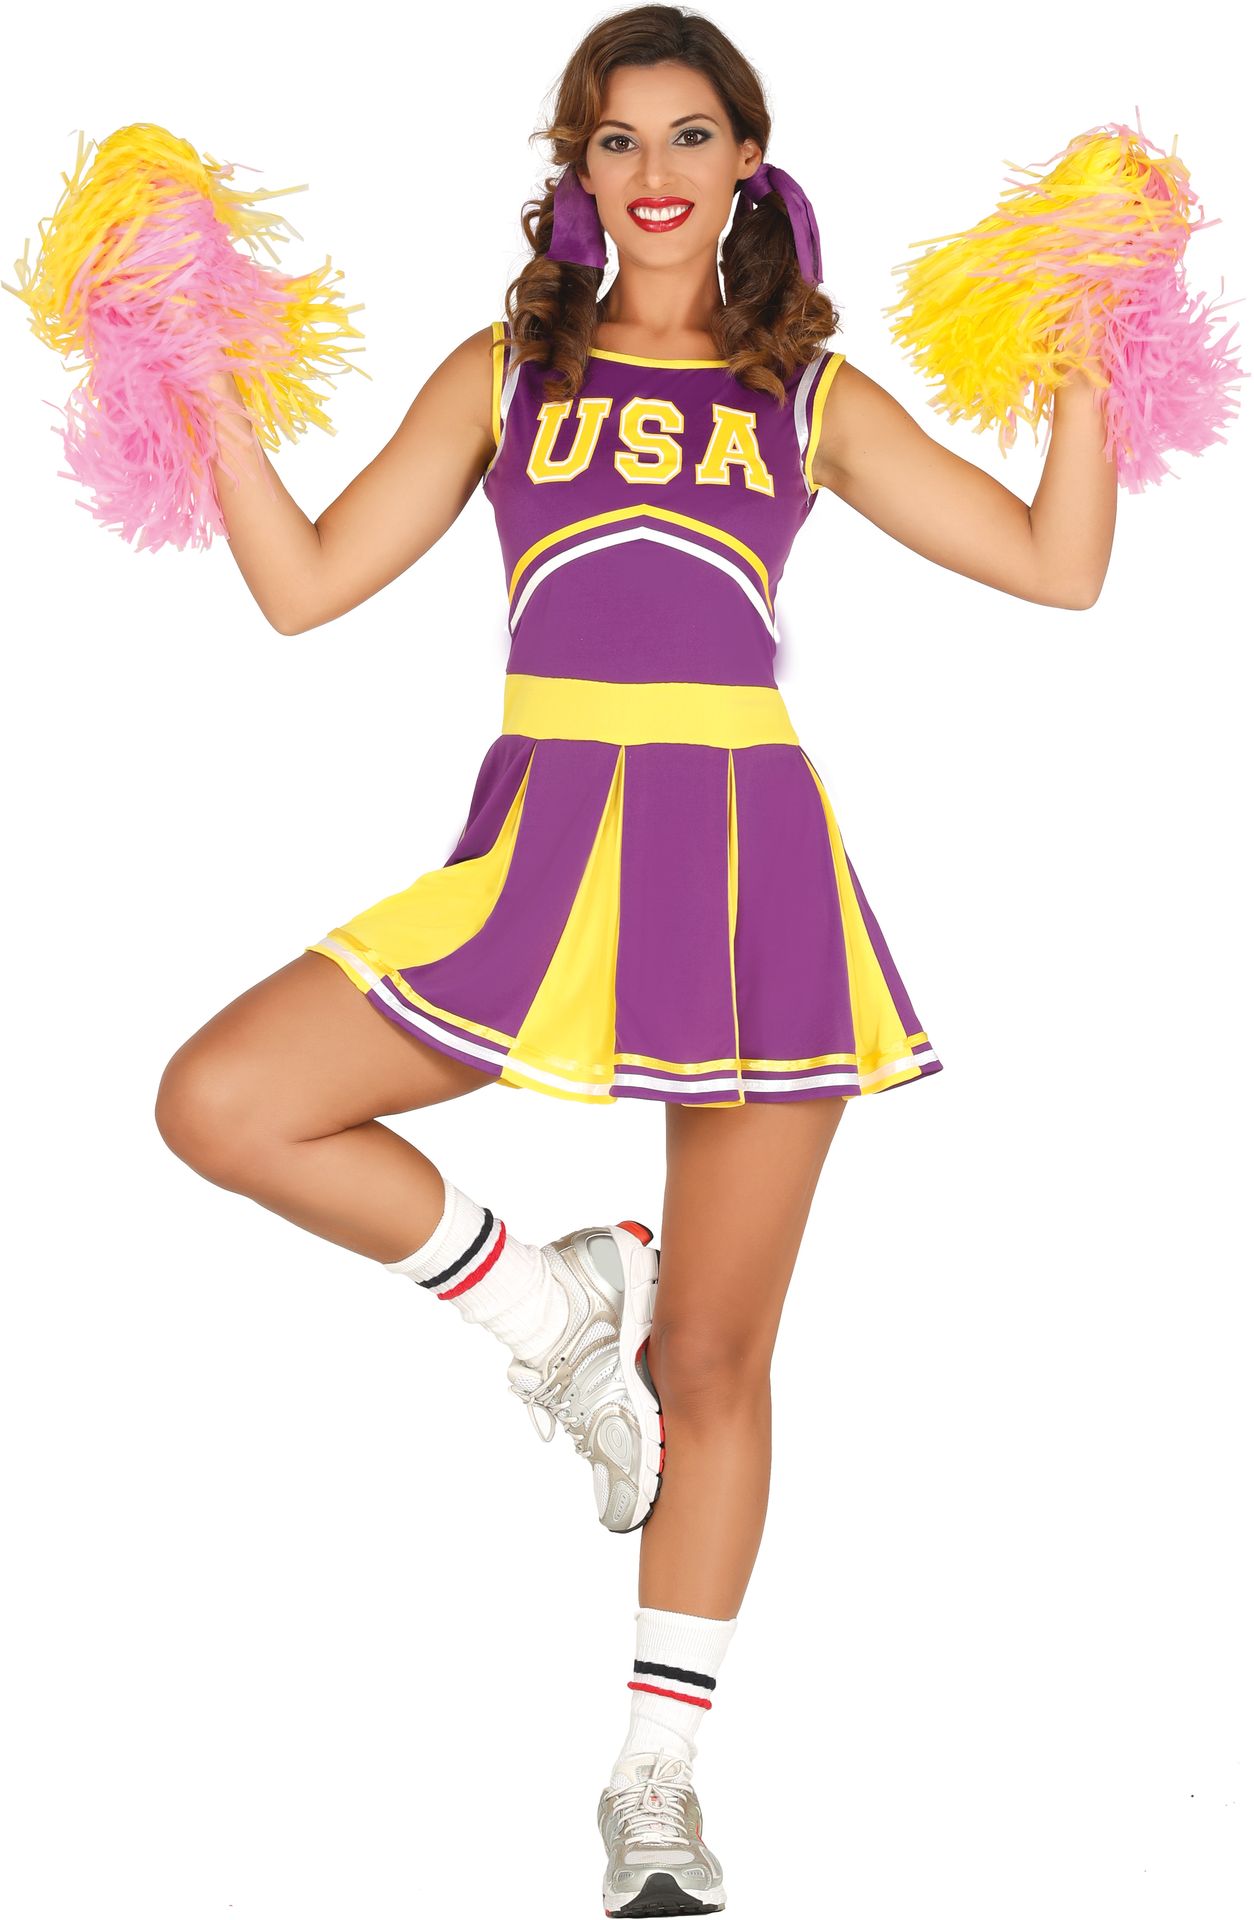 USA cheerleader outfit